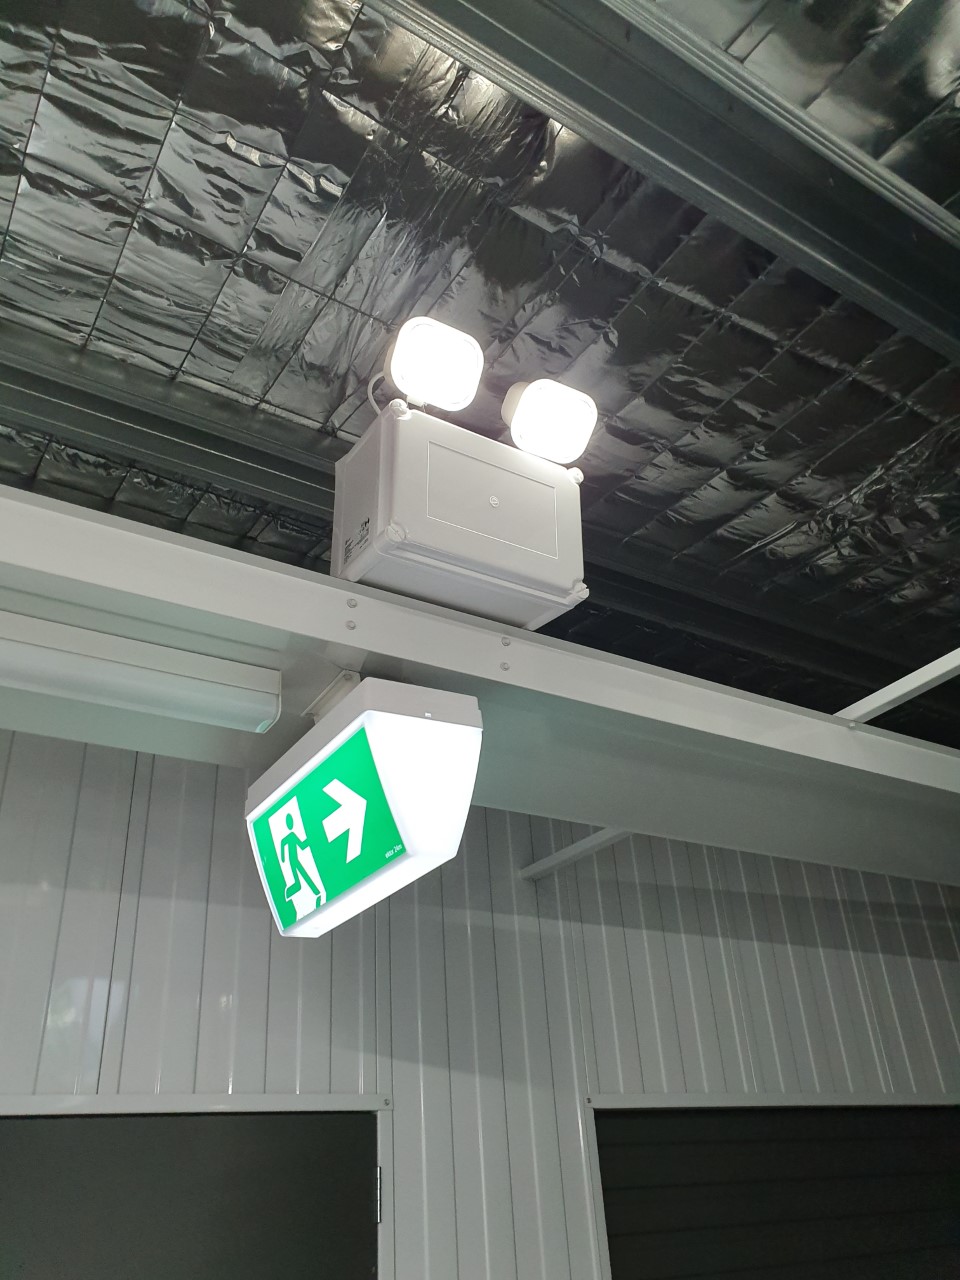 Exit Sign and Emergency Light being tested